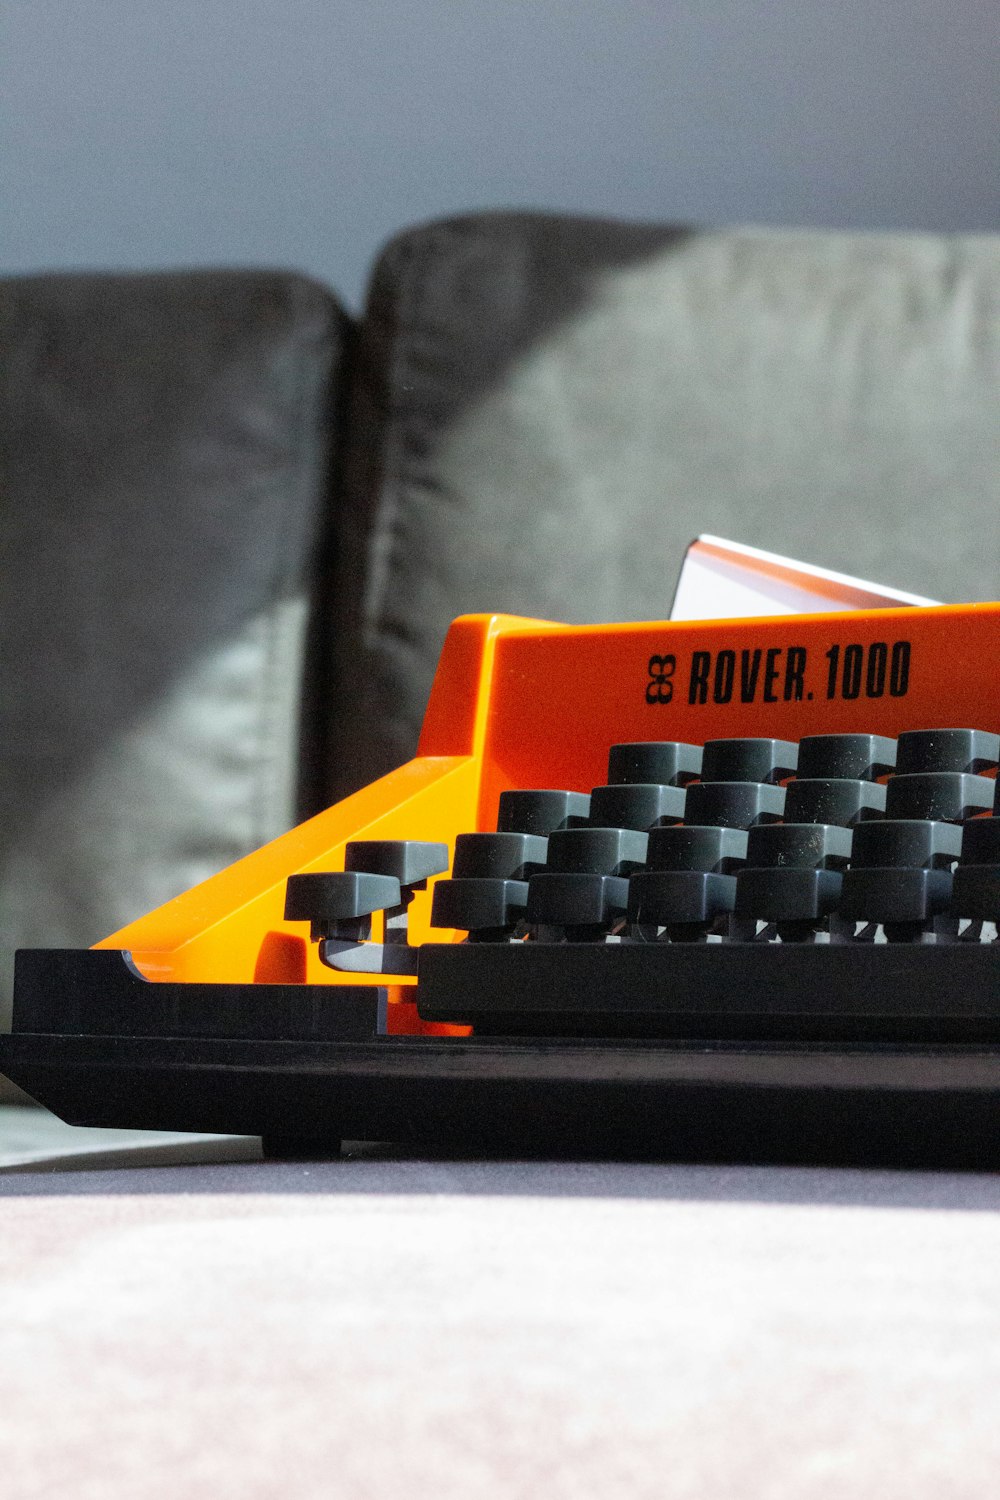 an orange and black toy typewriter sitting on a table